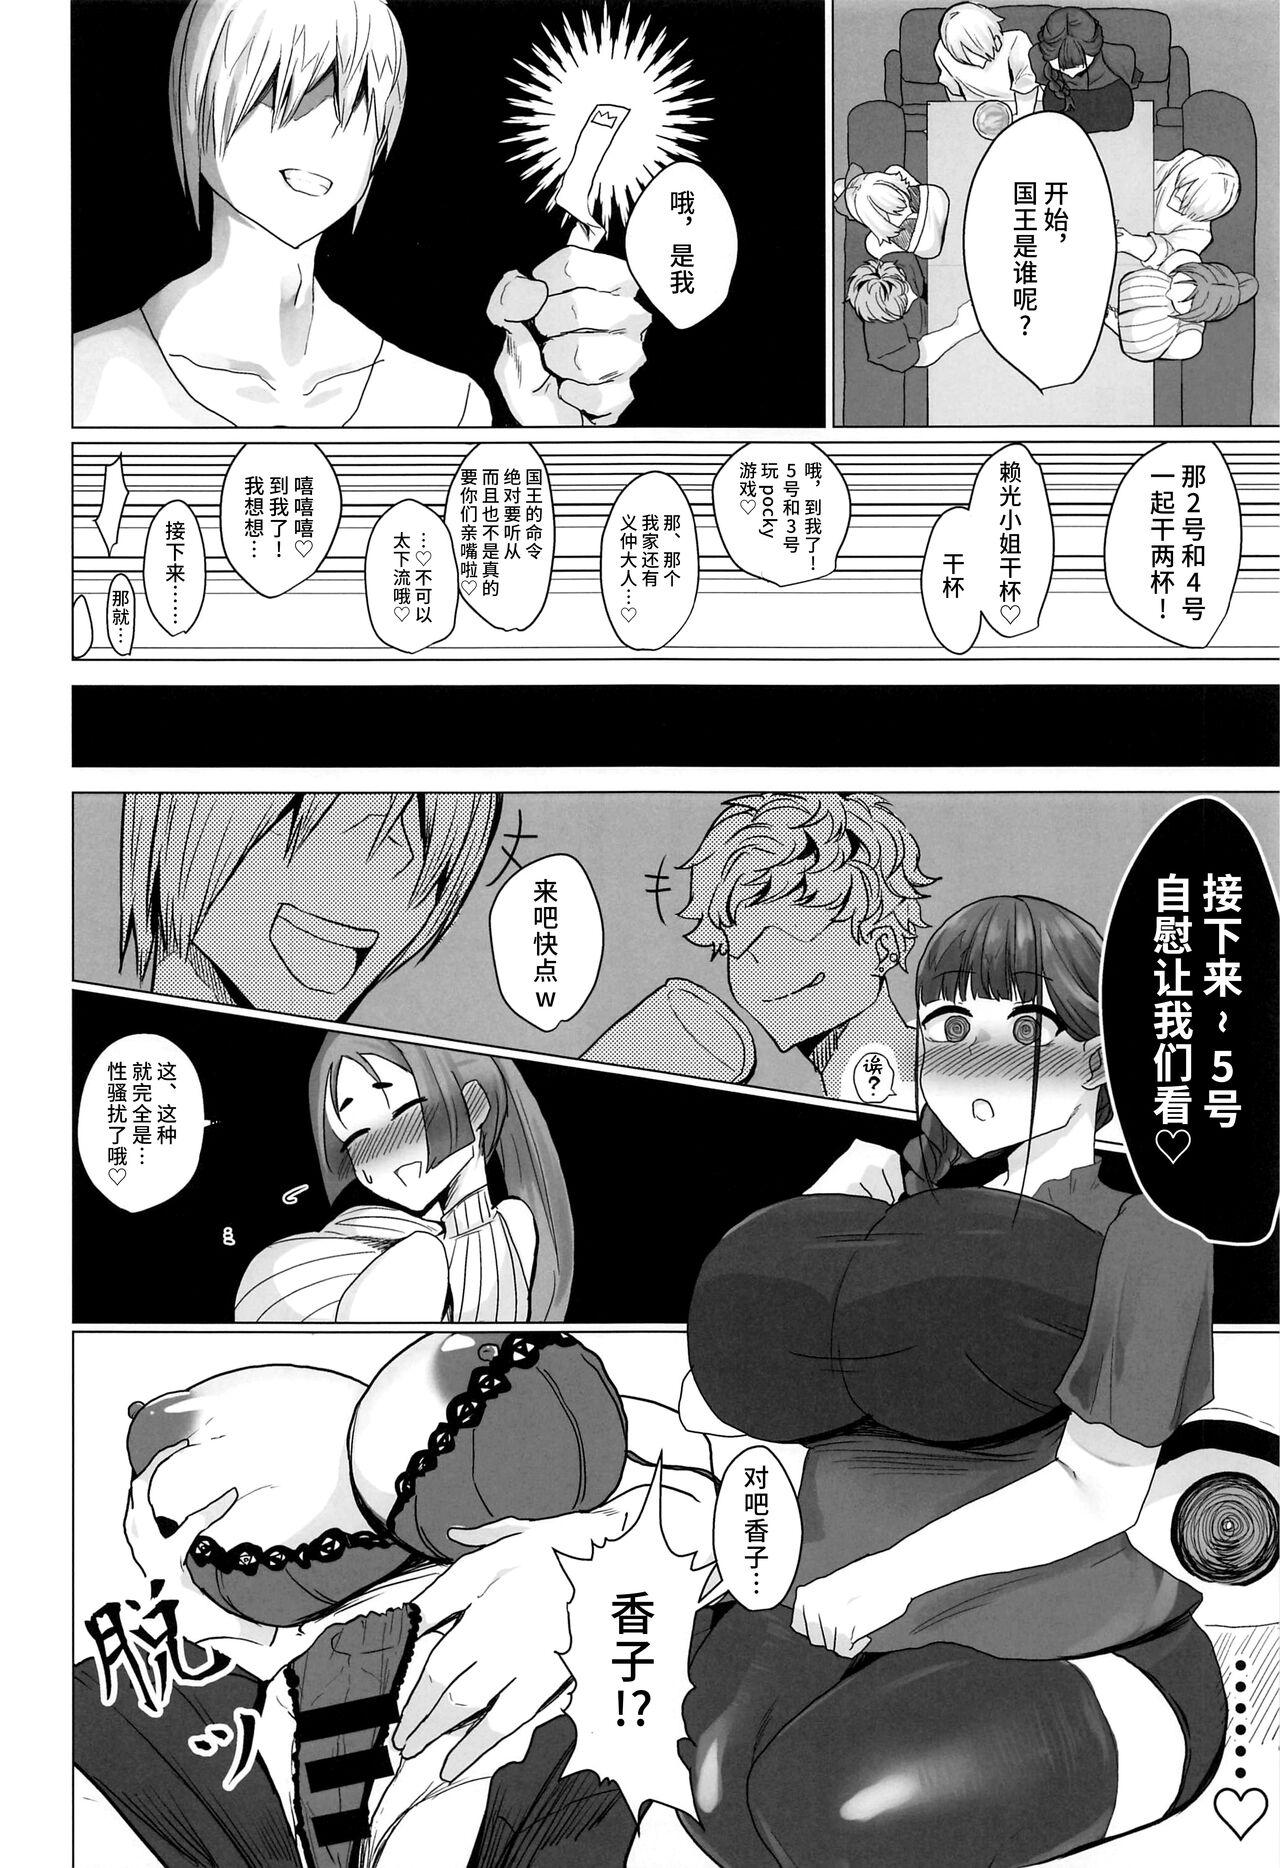 Awesome 王様の言う事は絶対 - Fate grand order Tgirls - Page 3